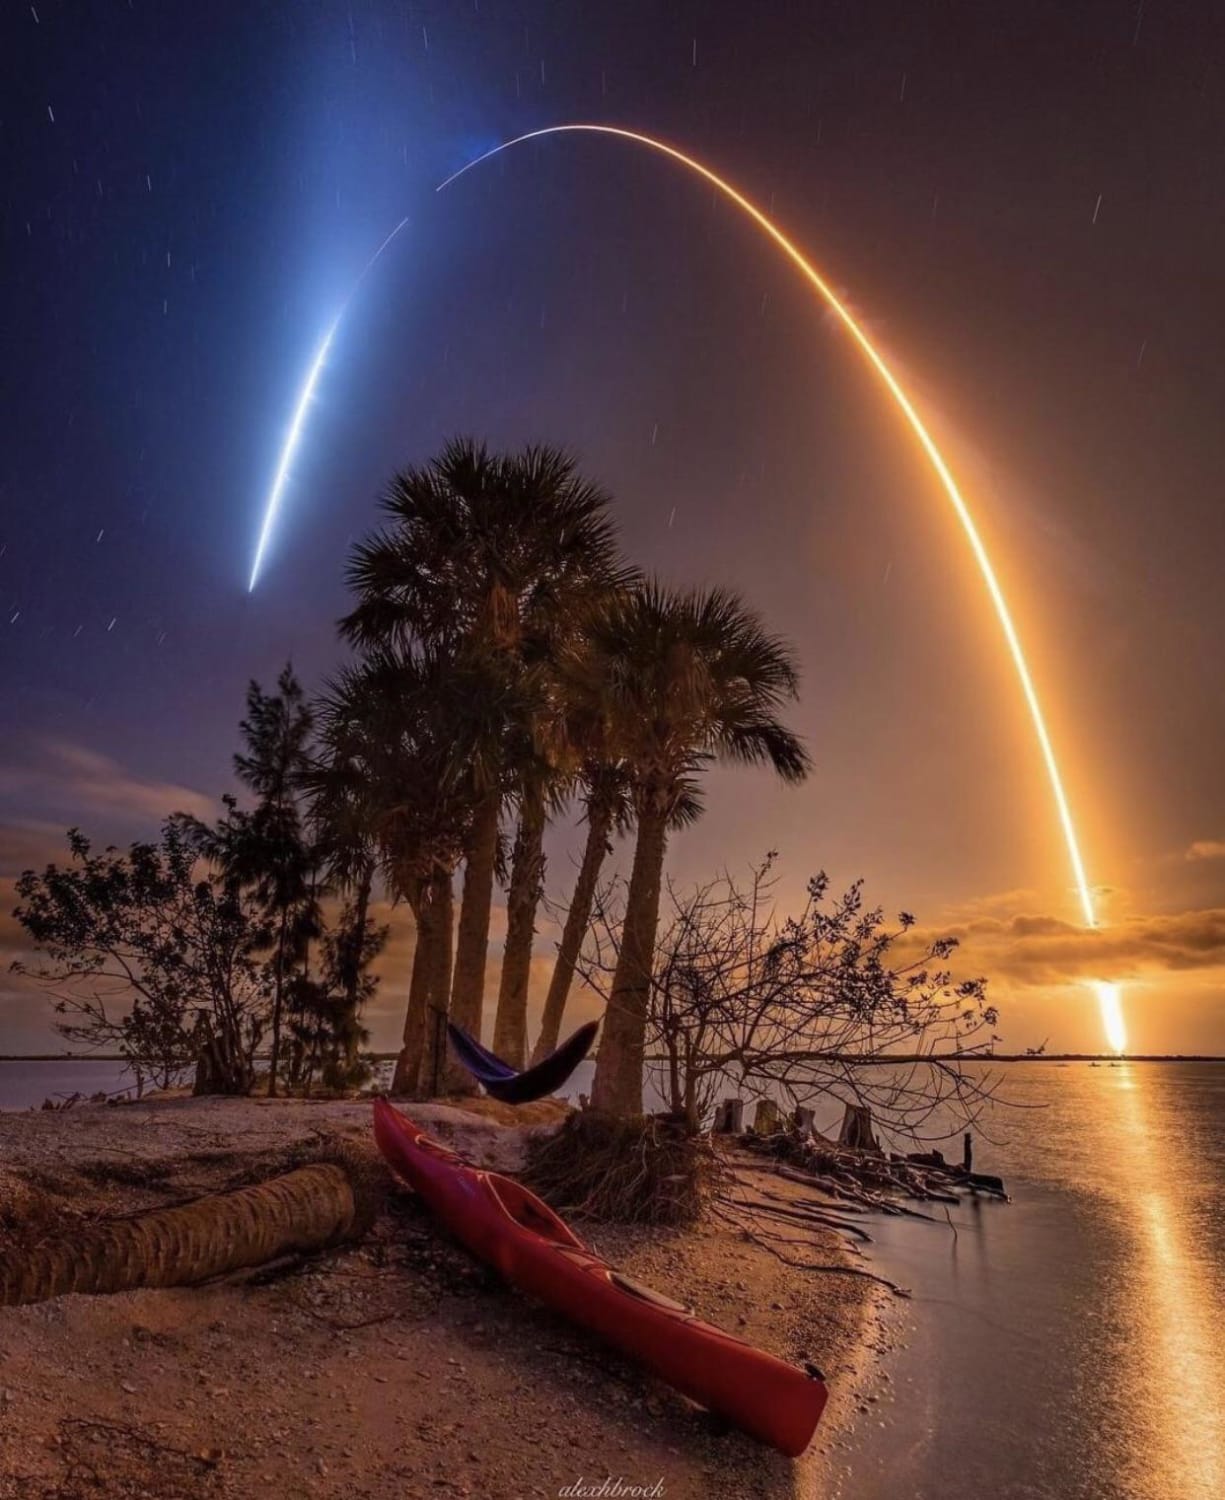 Space X launch seen from the Indian River, Florida